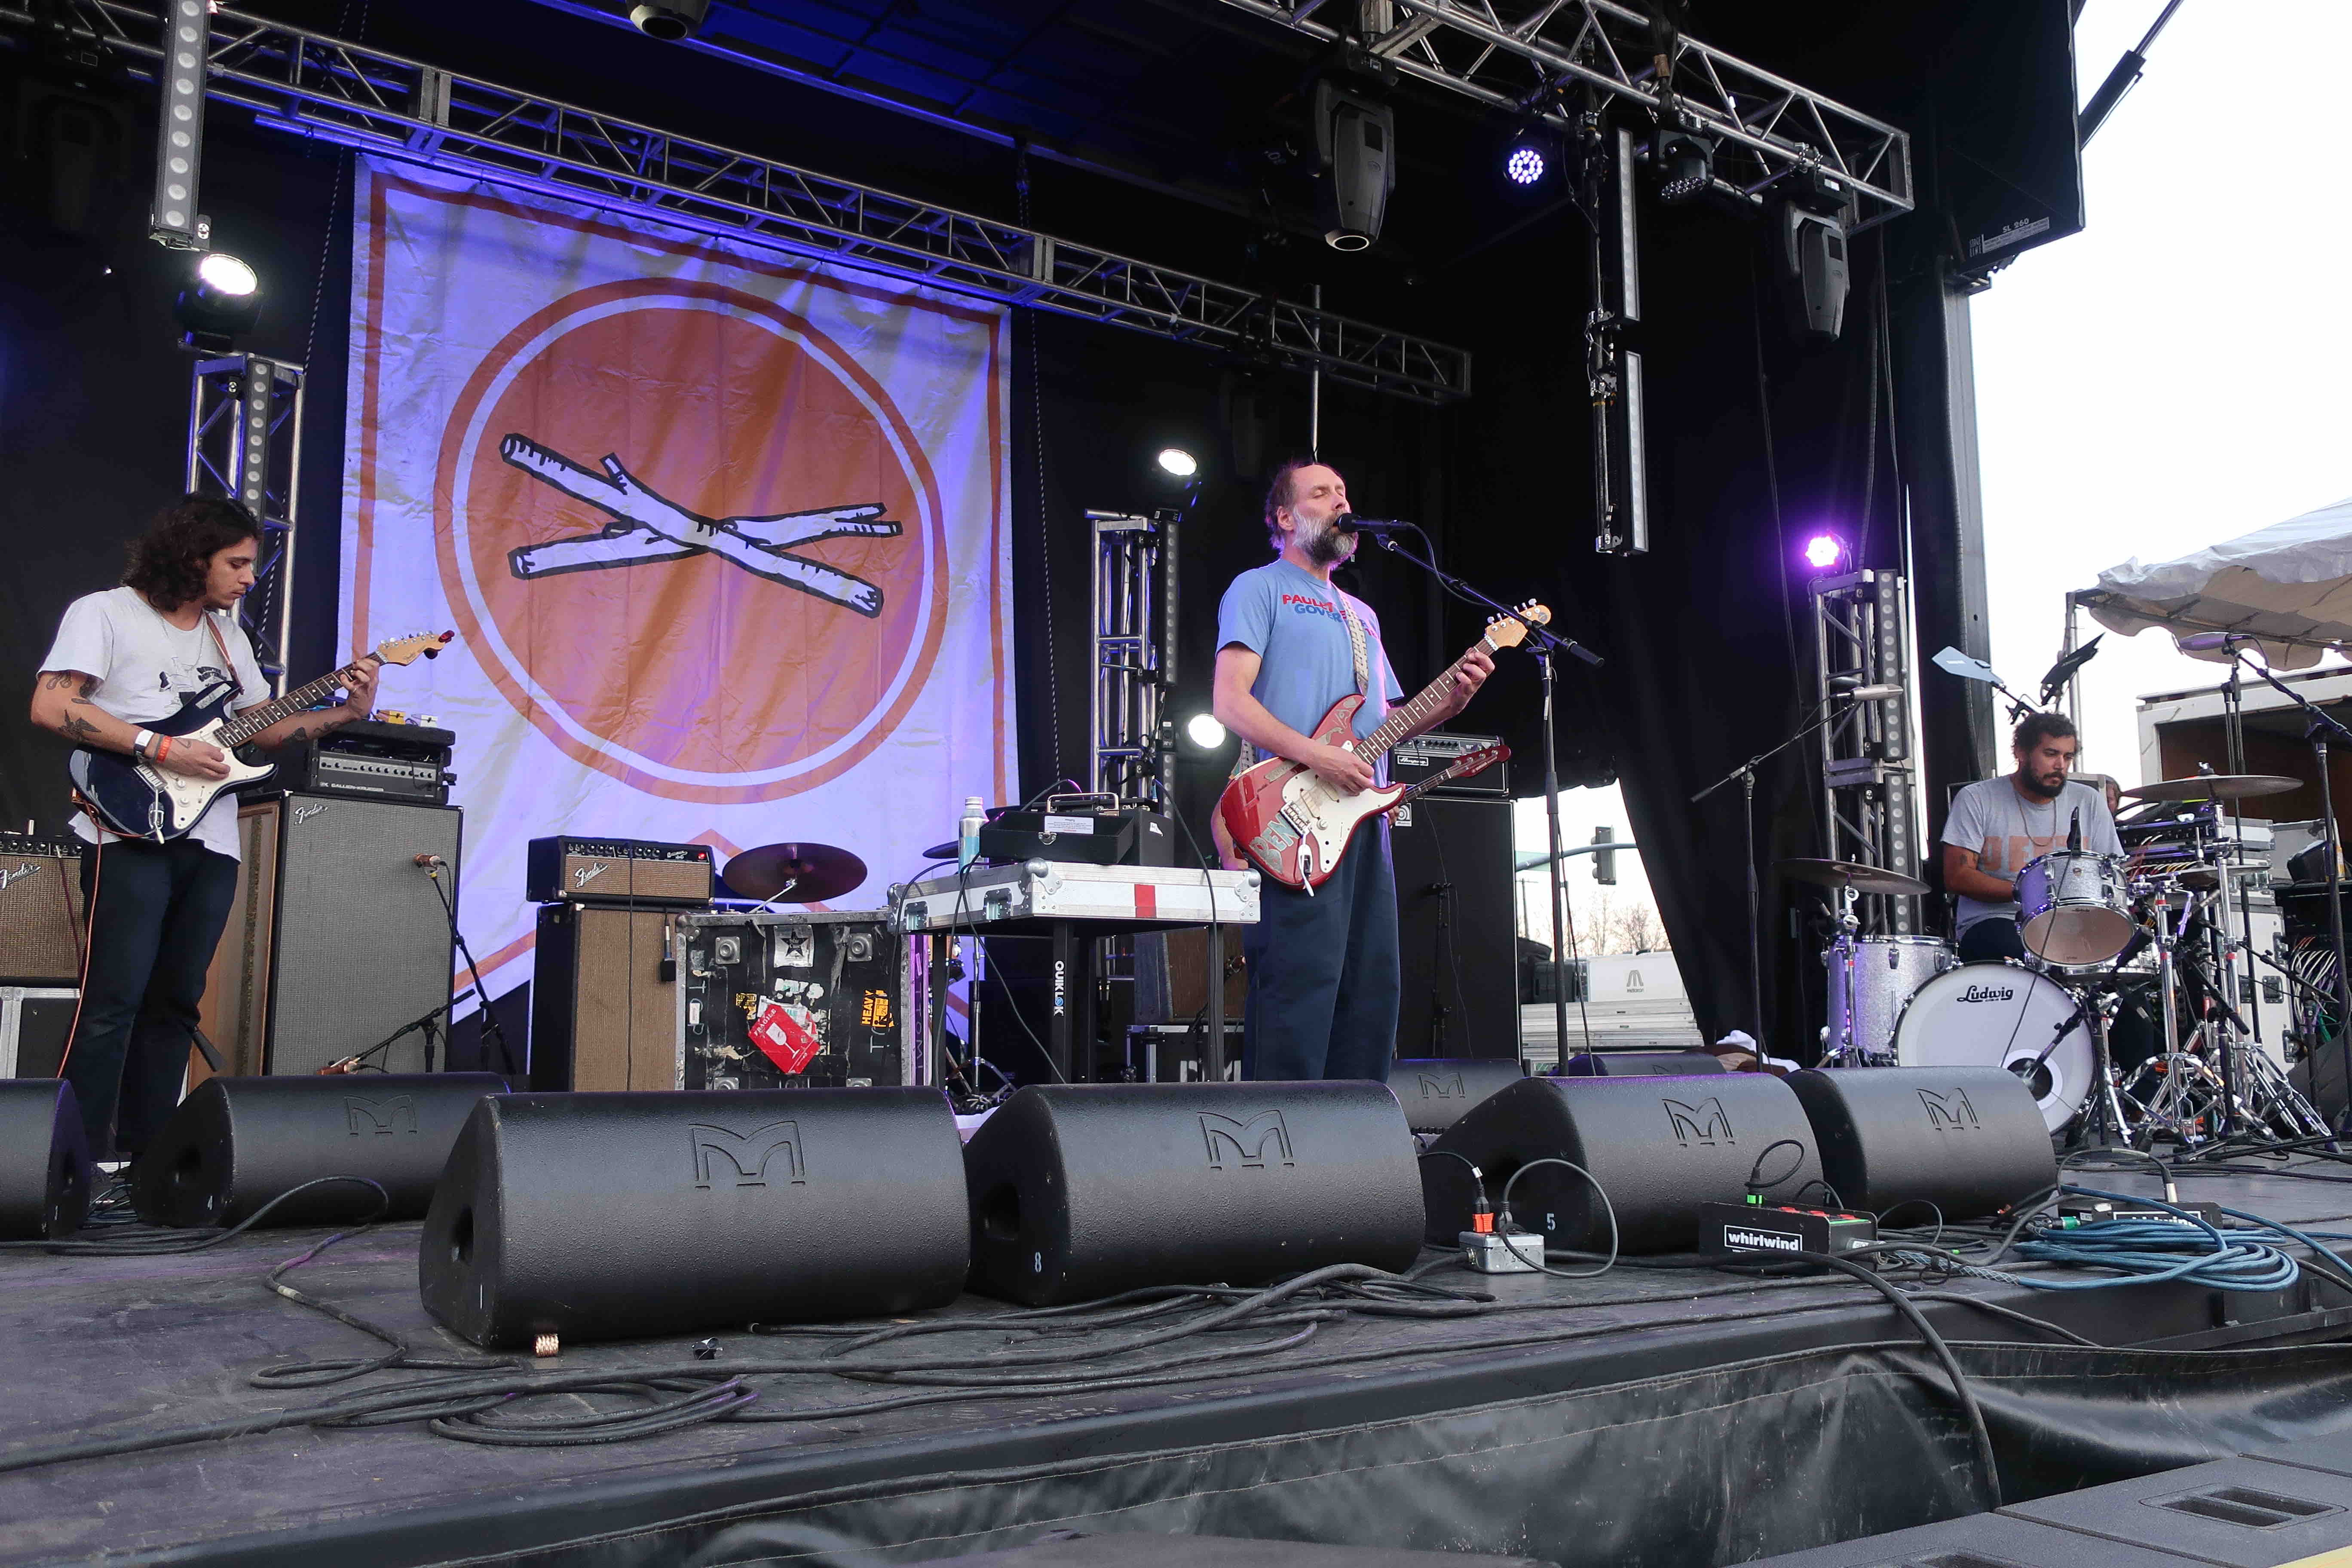 Boise's hometown Built To Spill energized the crowd at the 2019 Treefort Music Fest.